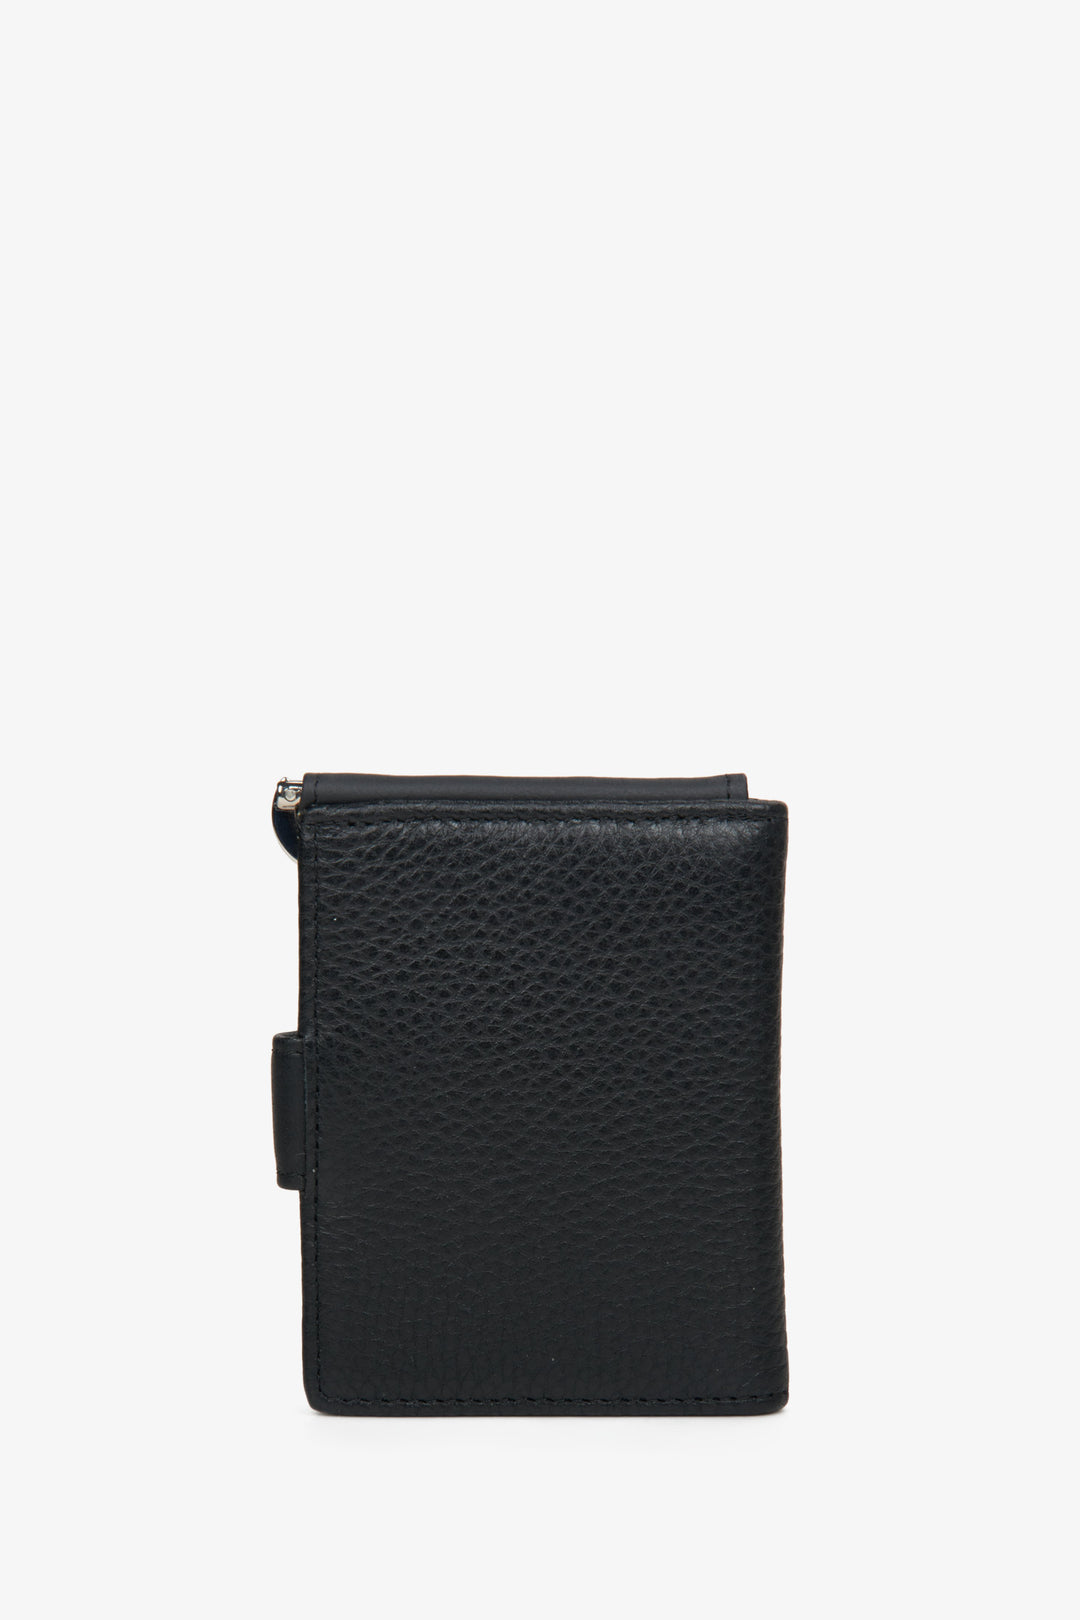 The back of the black genuine leather men's wallet by Estro.